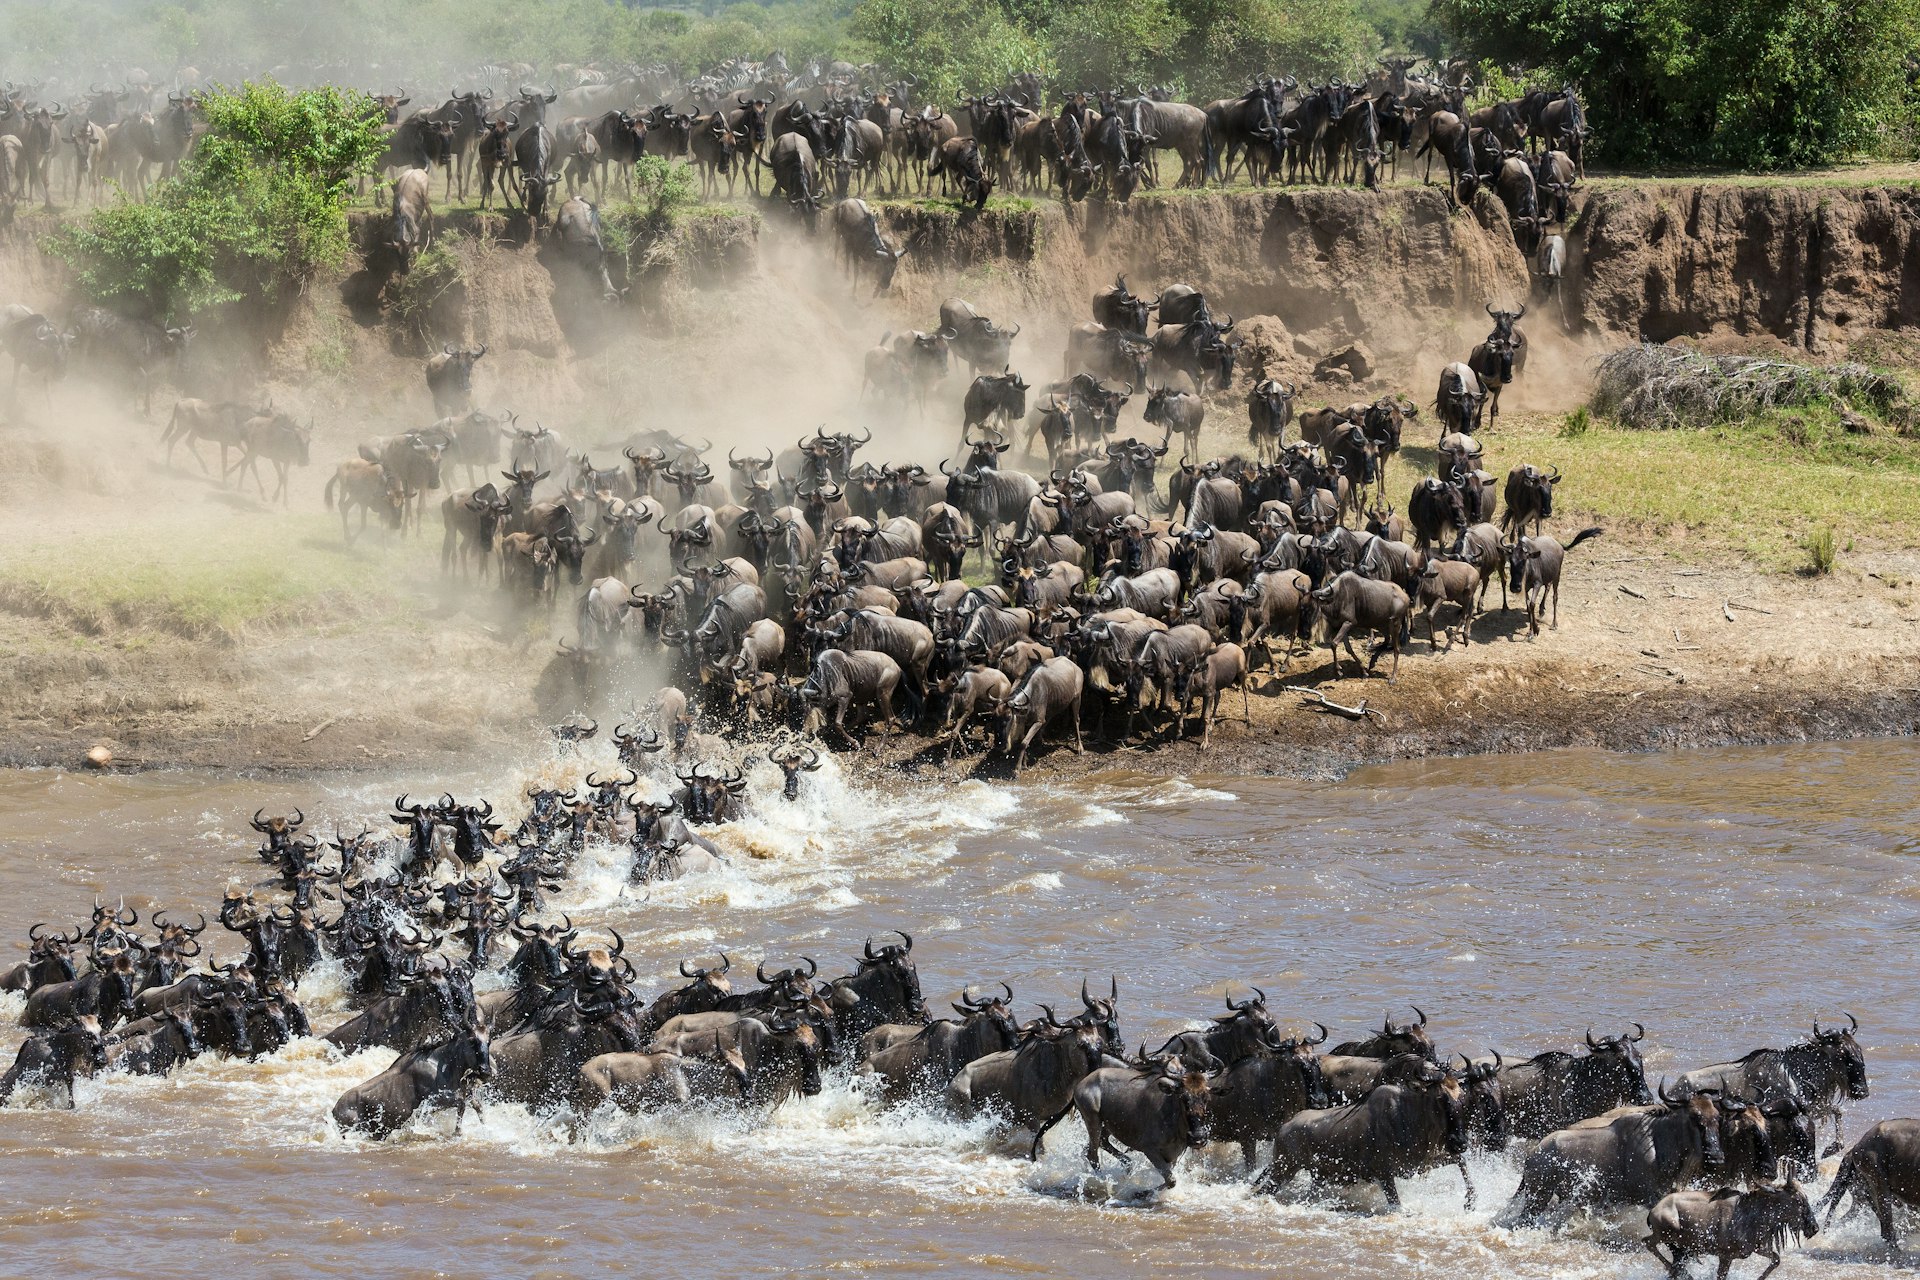 Hundreds of wildebeest scramble down a riverbank and across a river on their migration